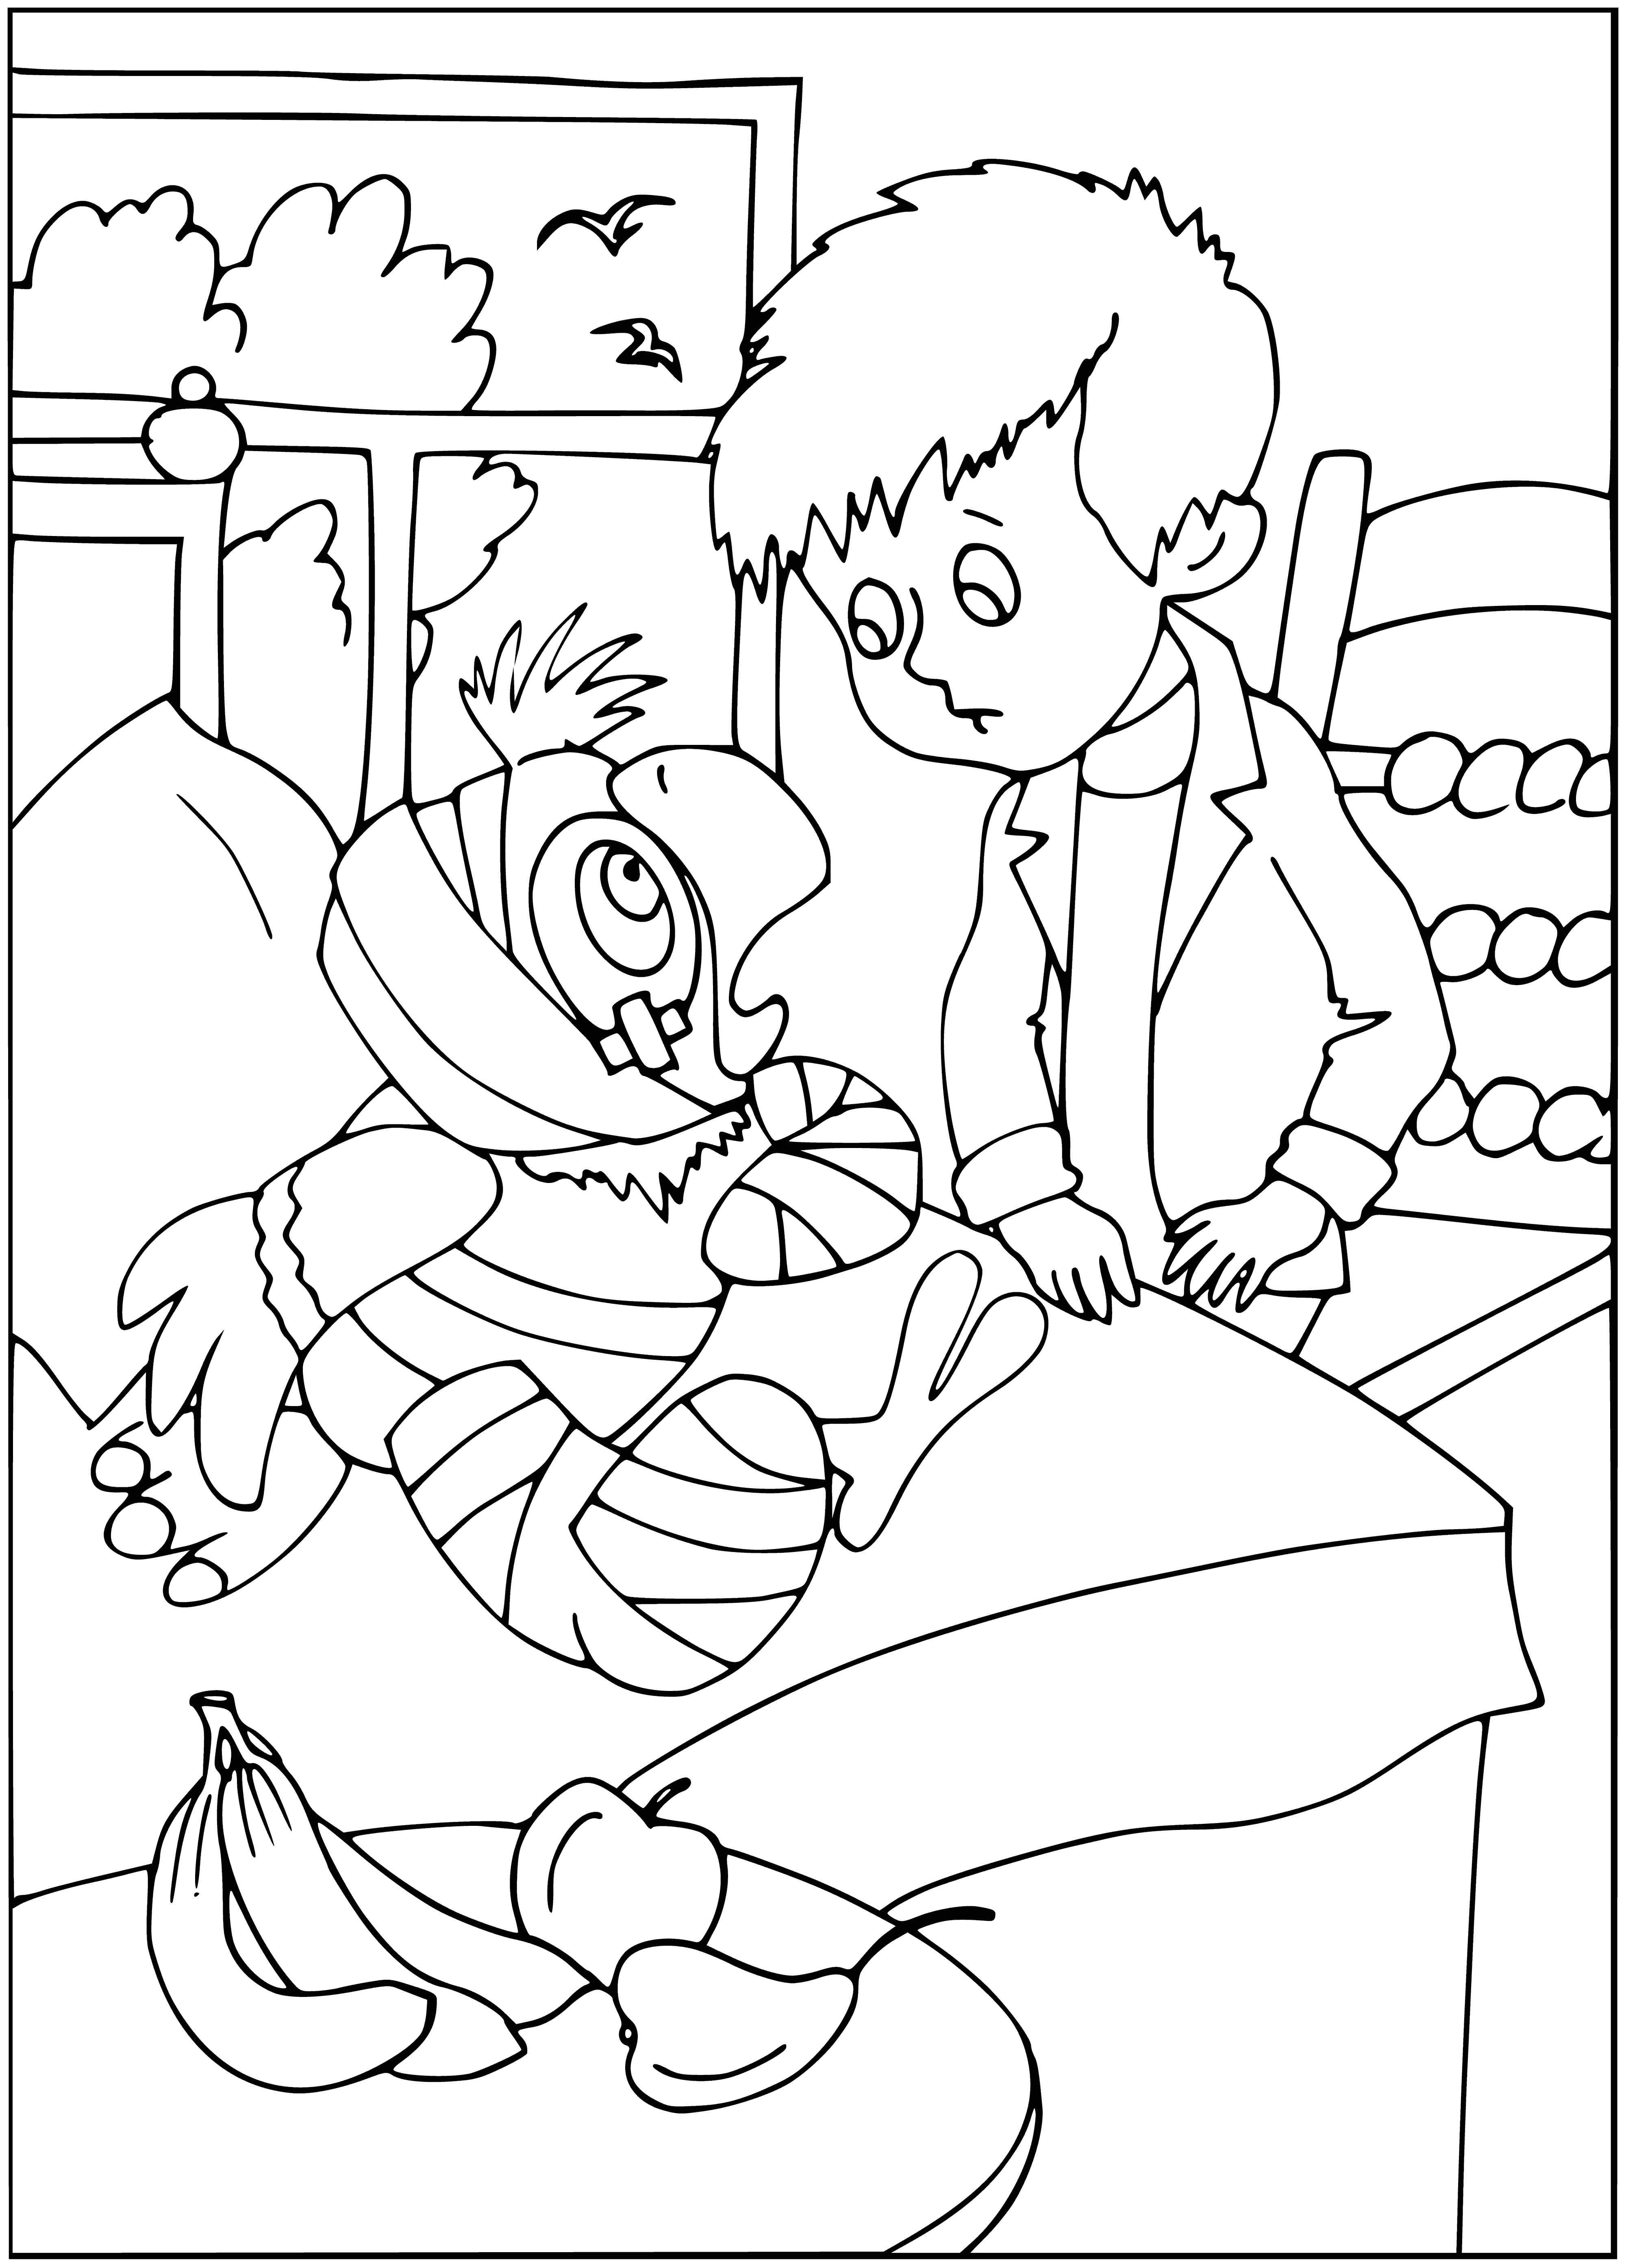 coloring page: Two parrots perch on a windowsill, content and happy in each other's company. Kesha has one wing outstretched, almost in a hug. #birdlove